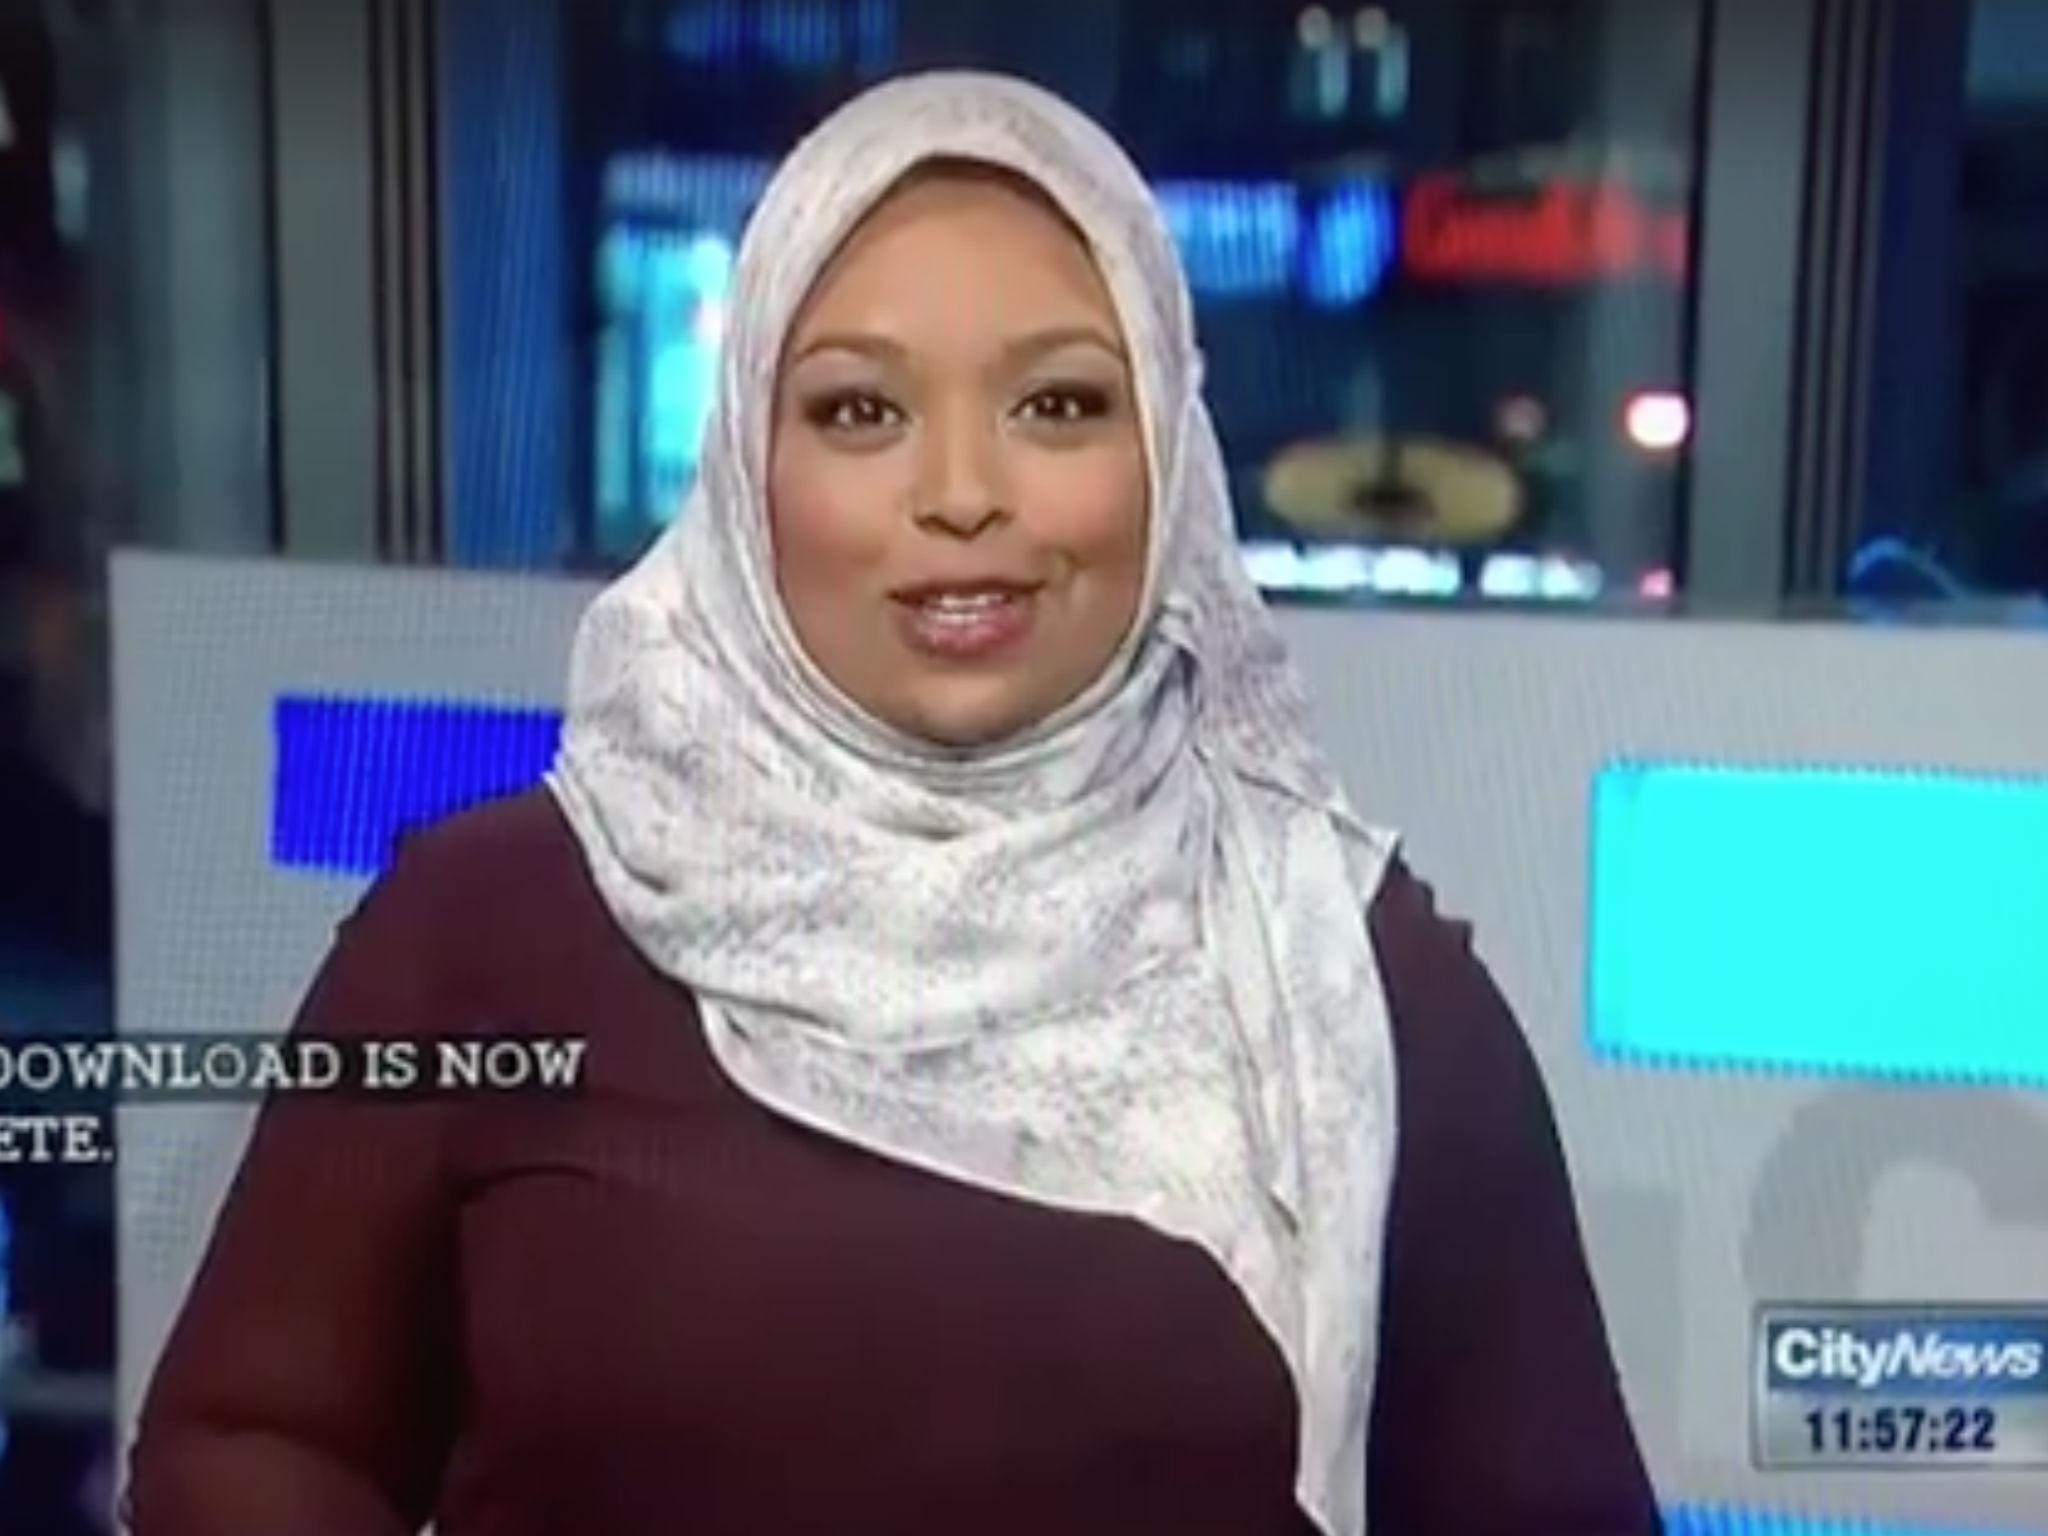 Ms Massa said she hopes people in future would not do a double take when they saw a hijab-wearer on television